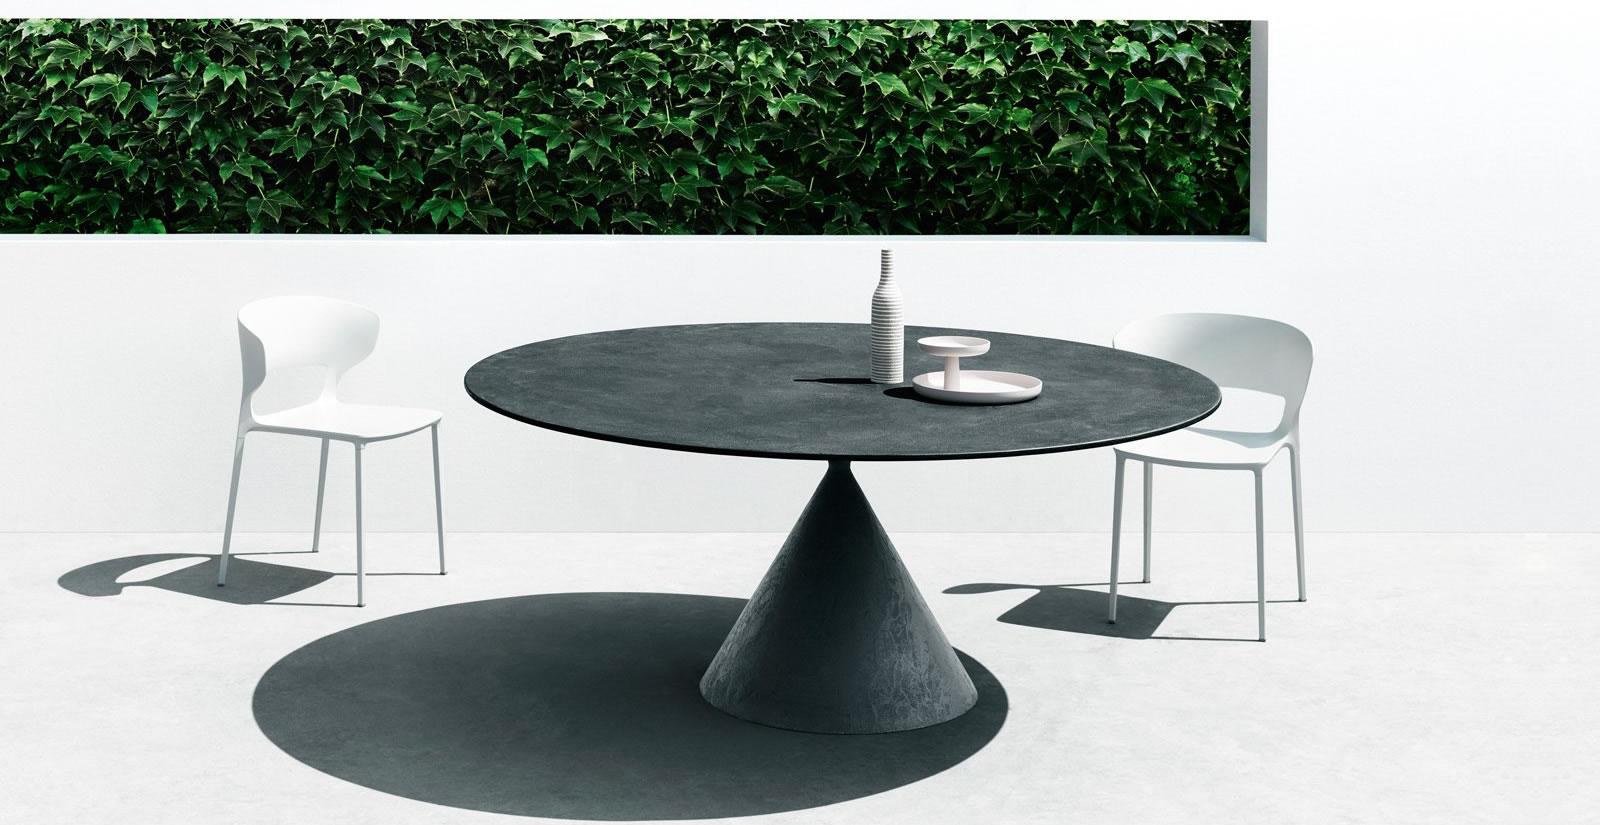 APRIL Desalto OUTDOOR OVAL Clay Table  Designed by Marc Krusin 2